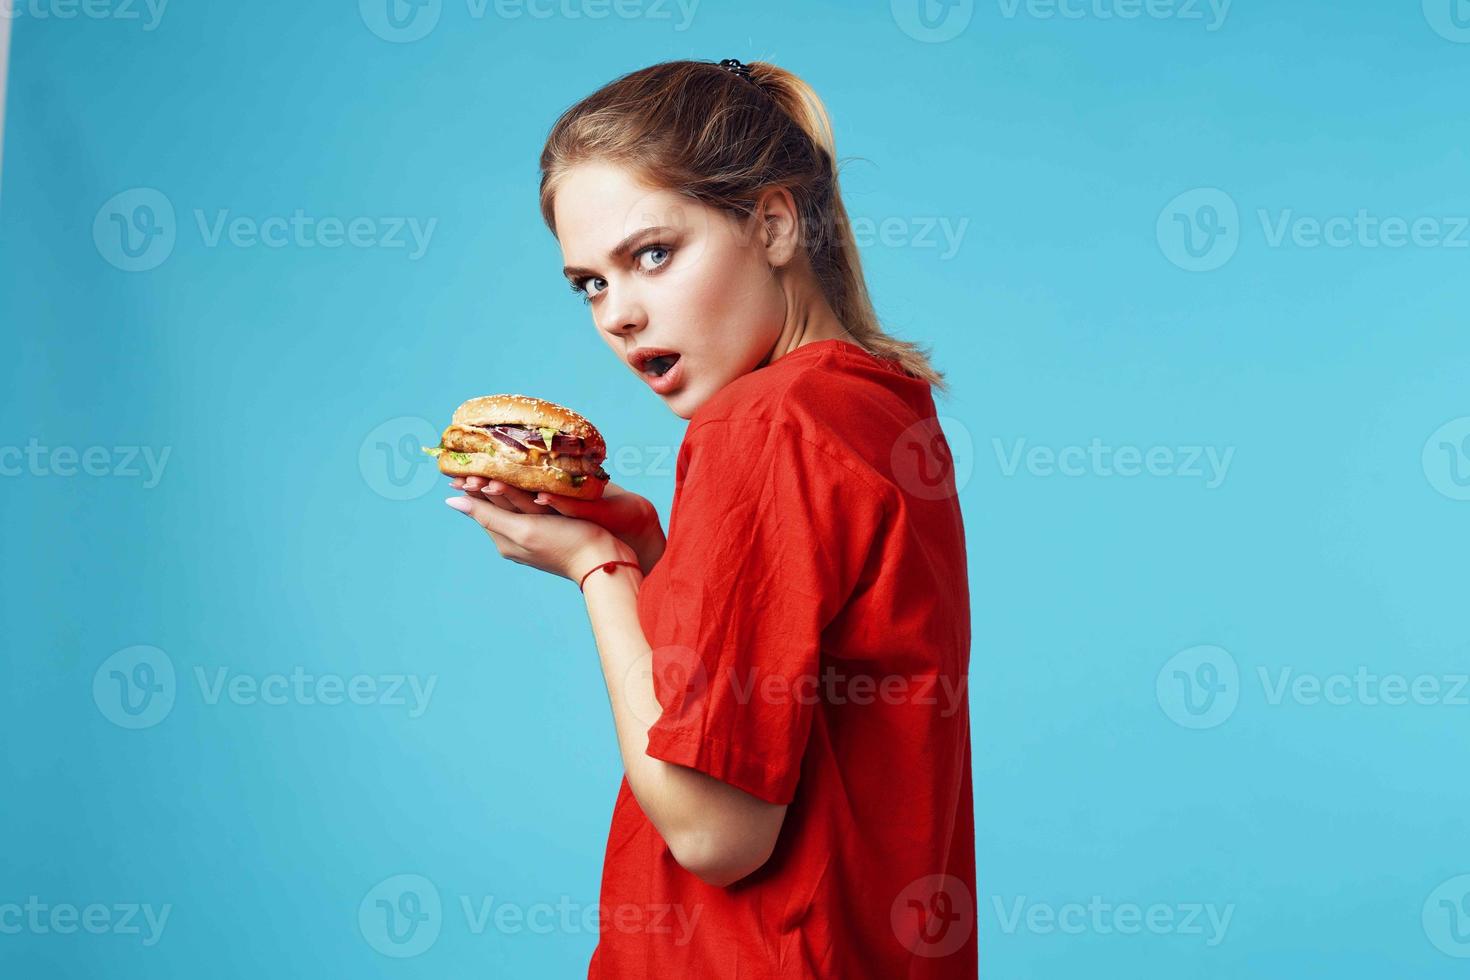 cheerful woman in red t-shirt hamburger in hands fast food blue background photo